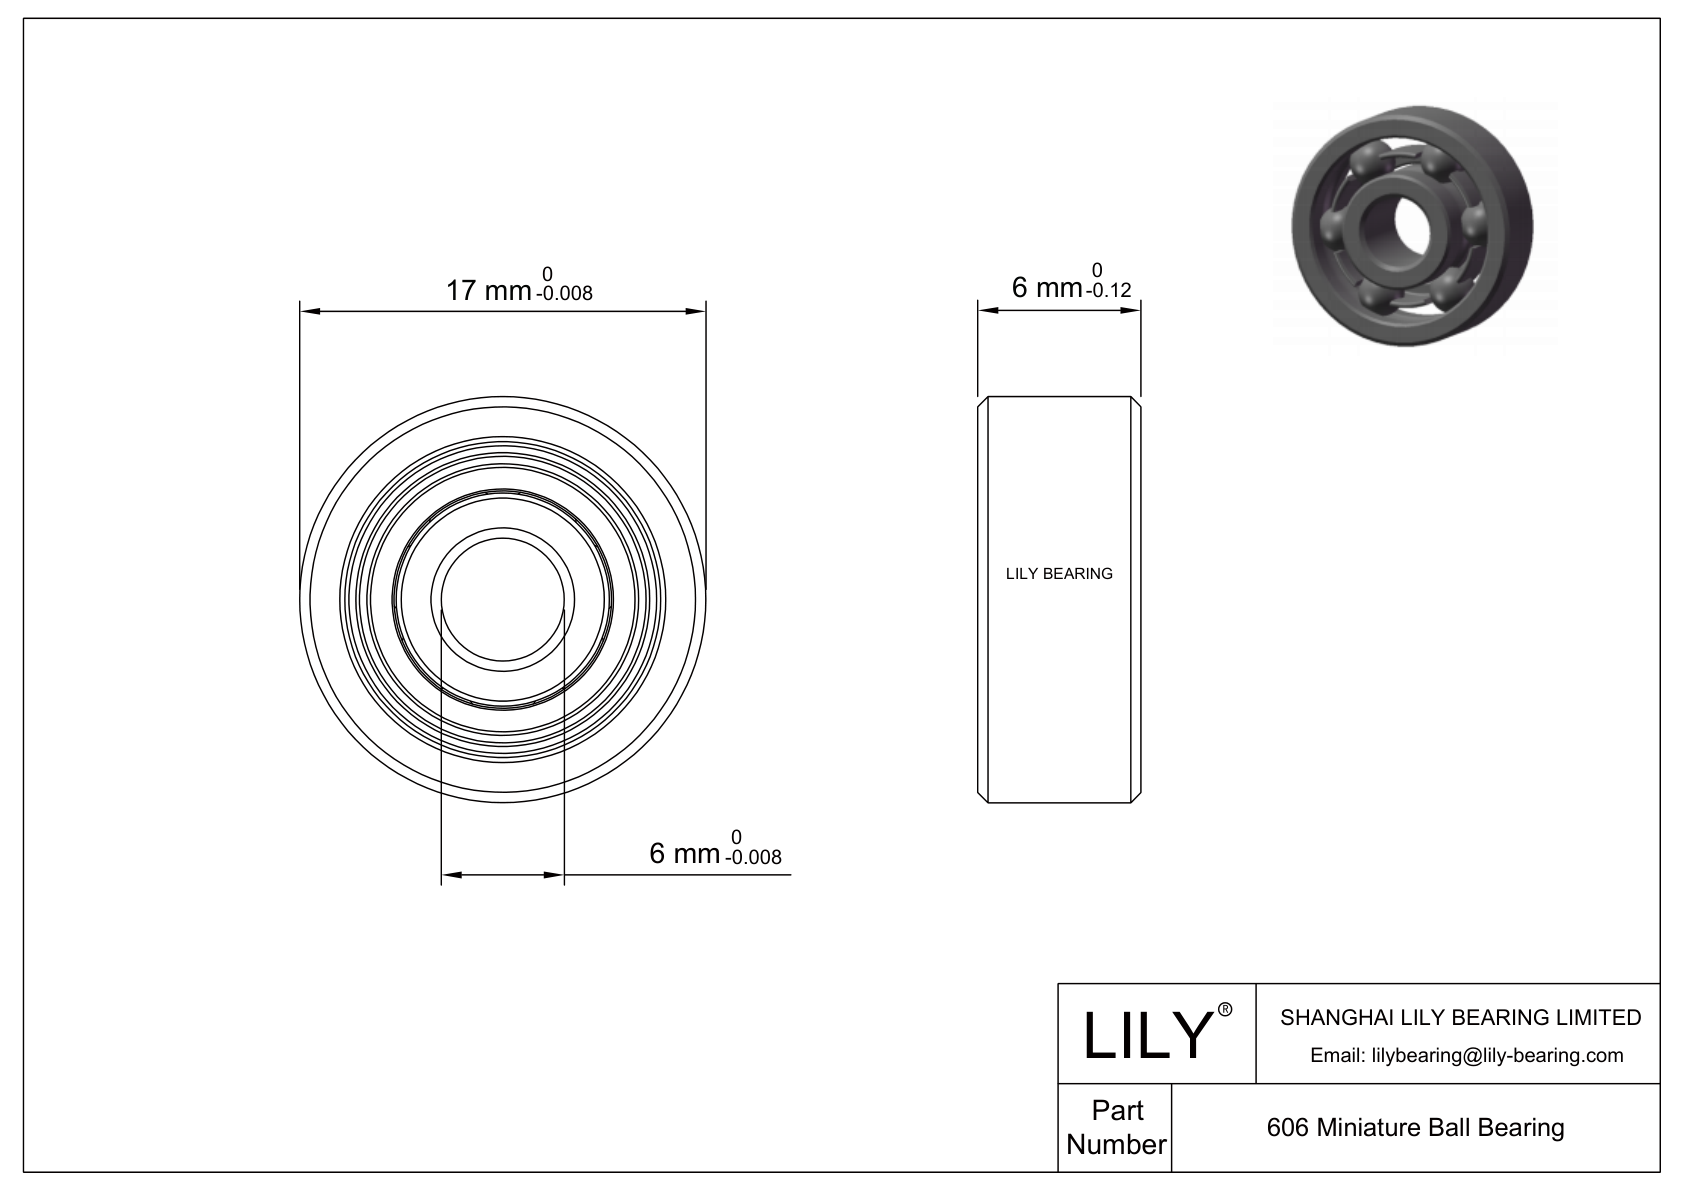 LILY-BS60622-8 POM Coated Bearing cad drawing